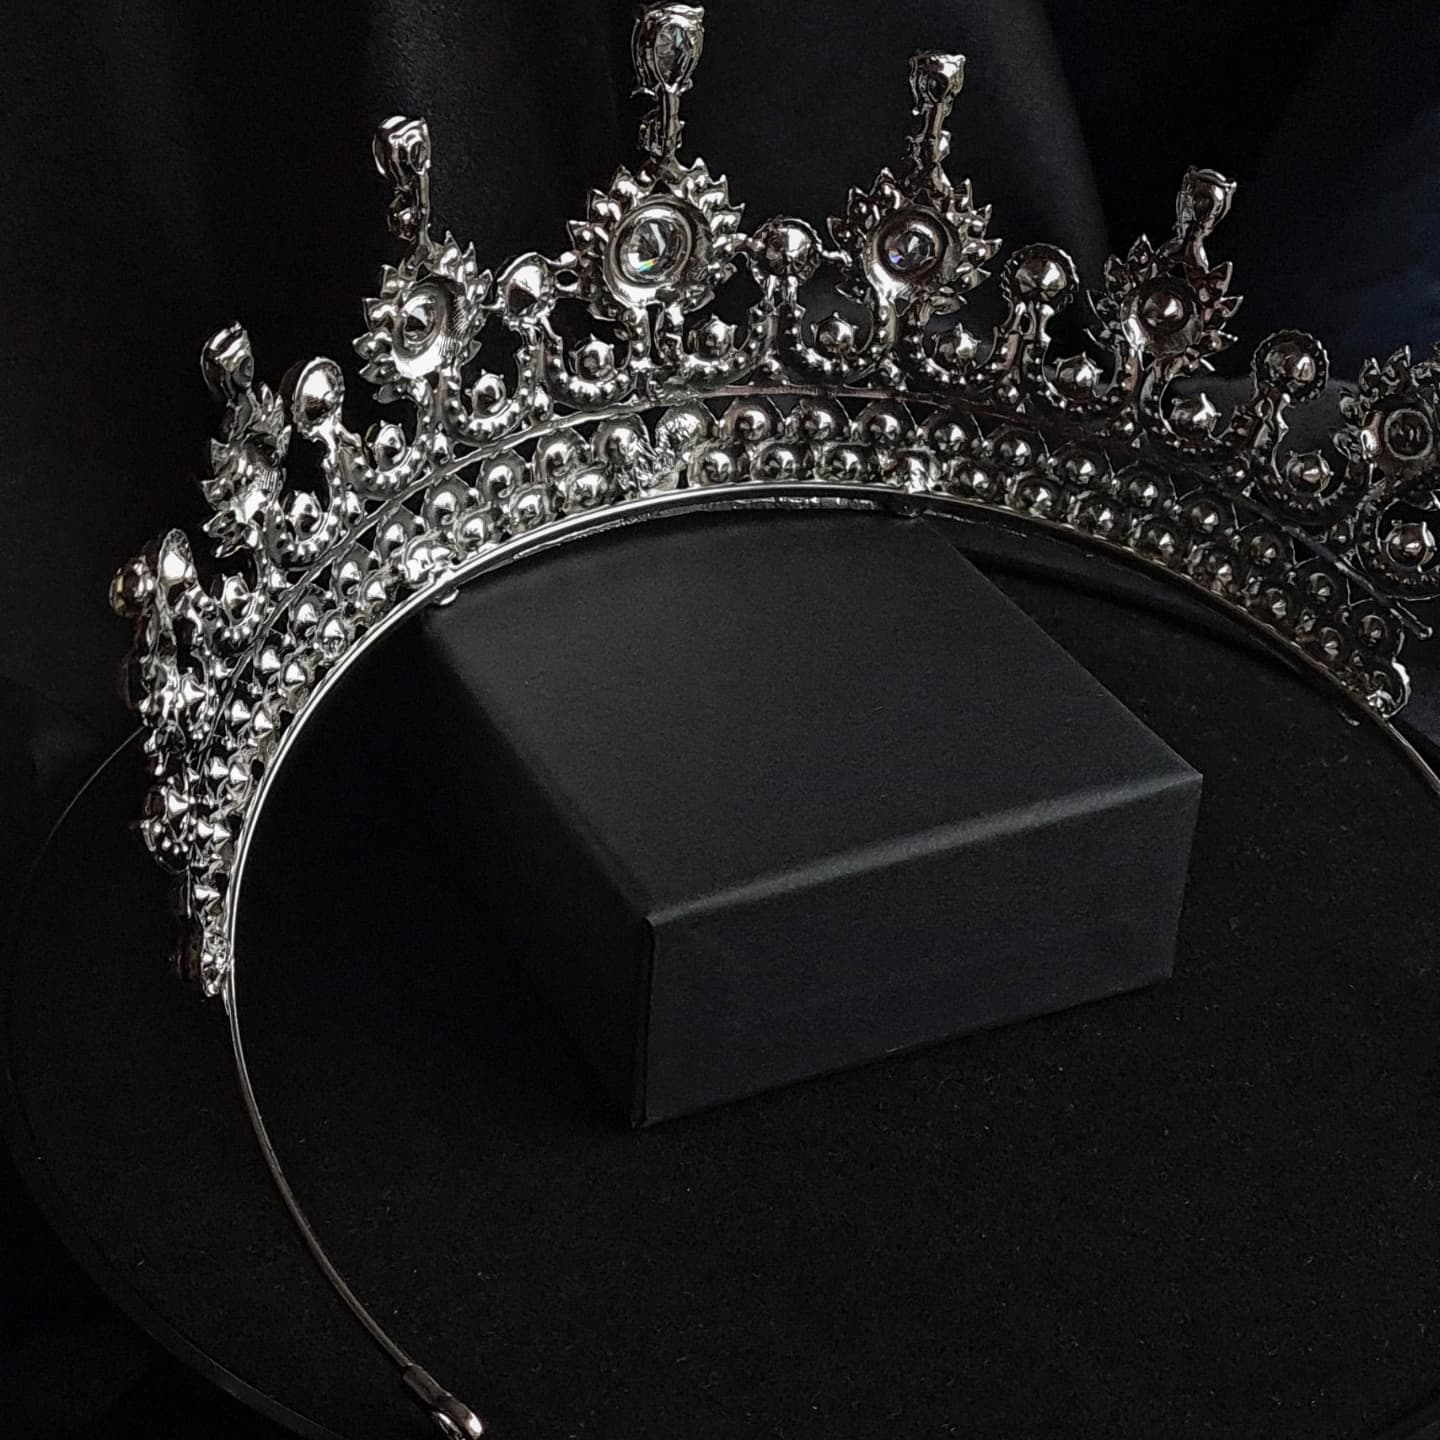 a back view of A close-up of a tiara with rhinestones on a black background. The tiara is made of silver and features a delicate design with cascading rhinestones. The rhinestones are clear and sparkling.